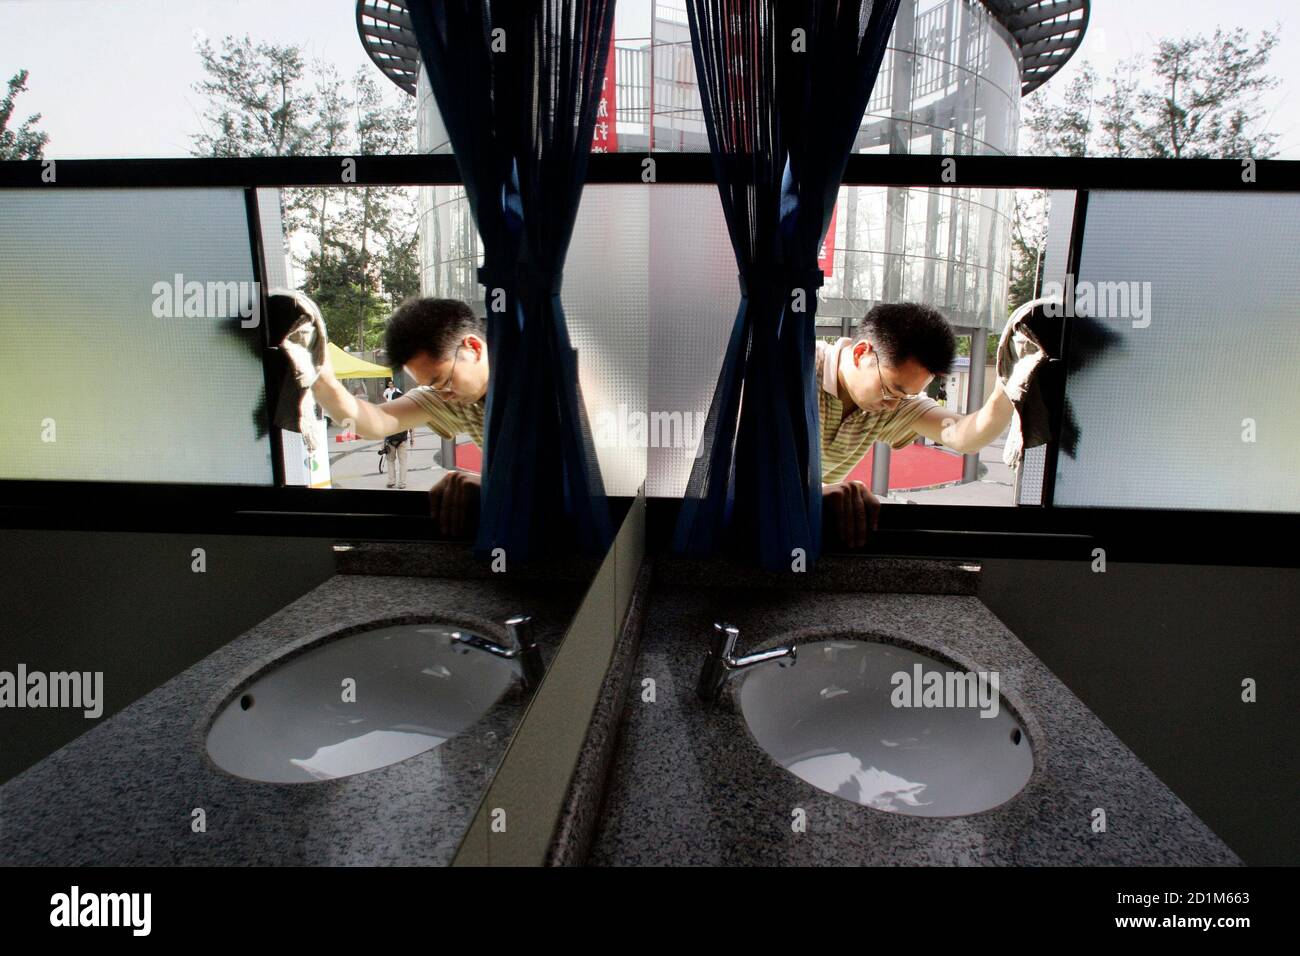 A worker cleans the windows of an ecological and environmental friendly mobile toilet bus, during the Saving Water Toilet Exhibition for the Beijing Olympics in Beijing June 7, 2006.  The exhibition showcased a range of prototype urinals, bowls, and traditional Asian crouching platforms -- all aimed at having a more positive impact on the environment.  REUTERS/Claro Cortes IV   (CHINA) Stock Photo